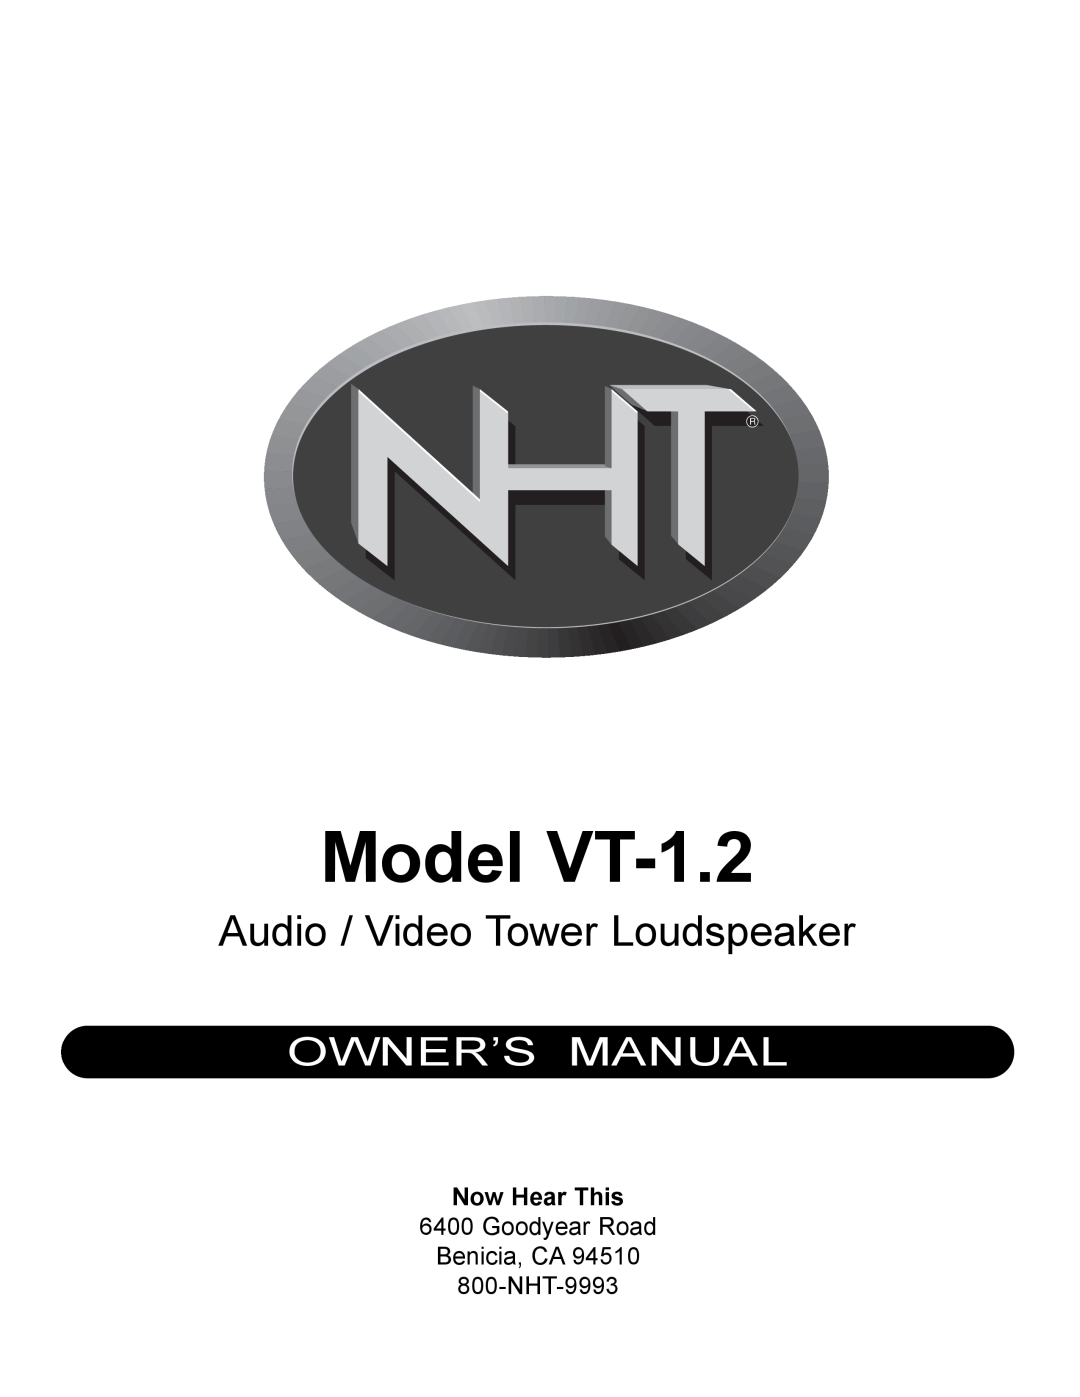 NHT owner manual Now Hear This, Model VT-1.2, Audio / Video Tower Loudspeaker, Goodyear Road Benicia, CA 800-NHT-9993 